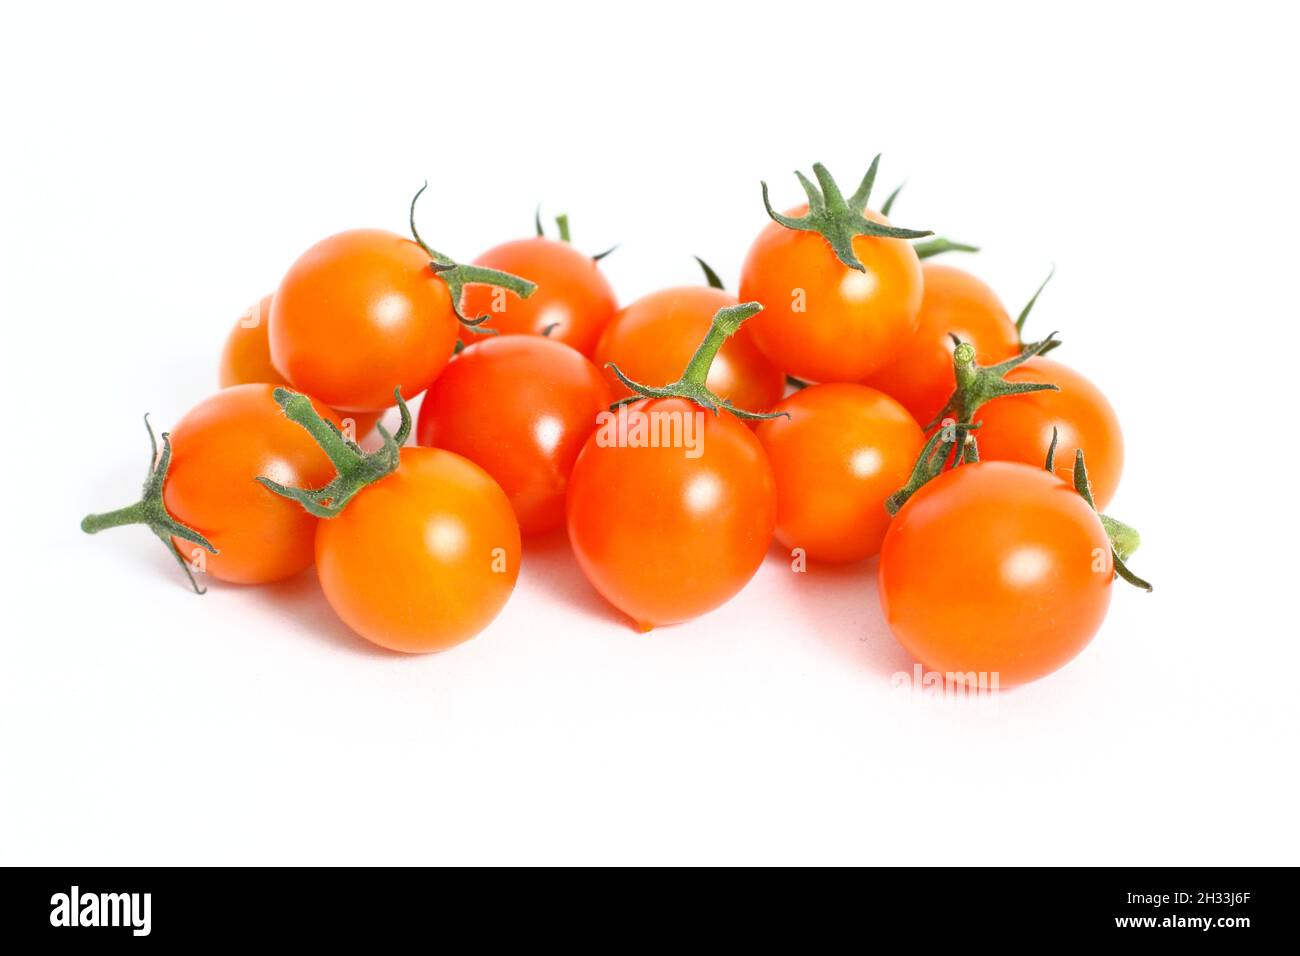 Cherry tomatoes. Freshly picked Sungold cherry tomatoes isolated on a white background. UK Stock Photo